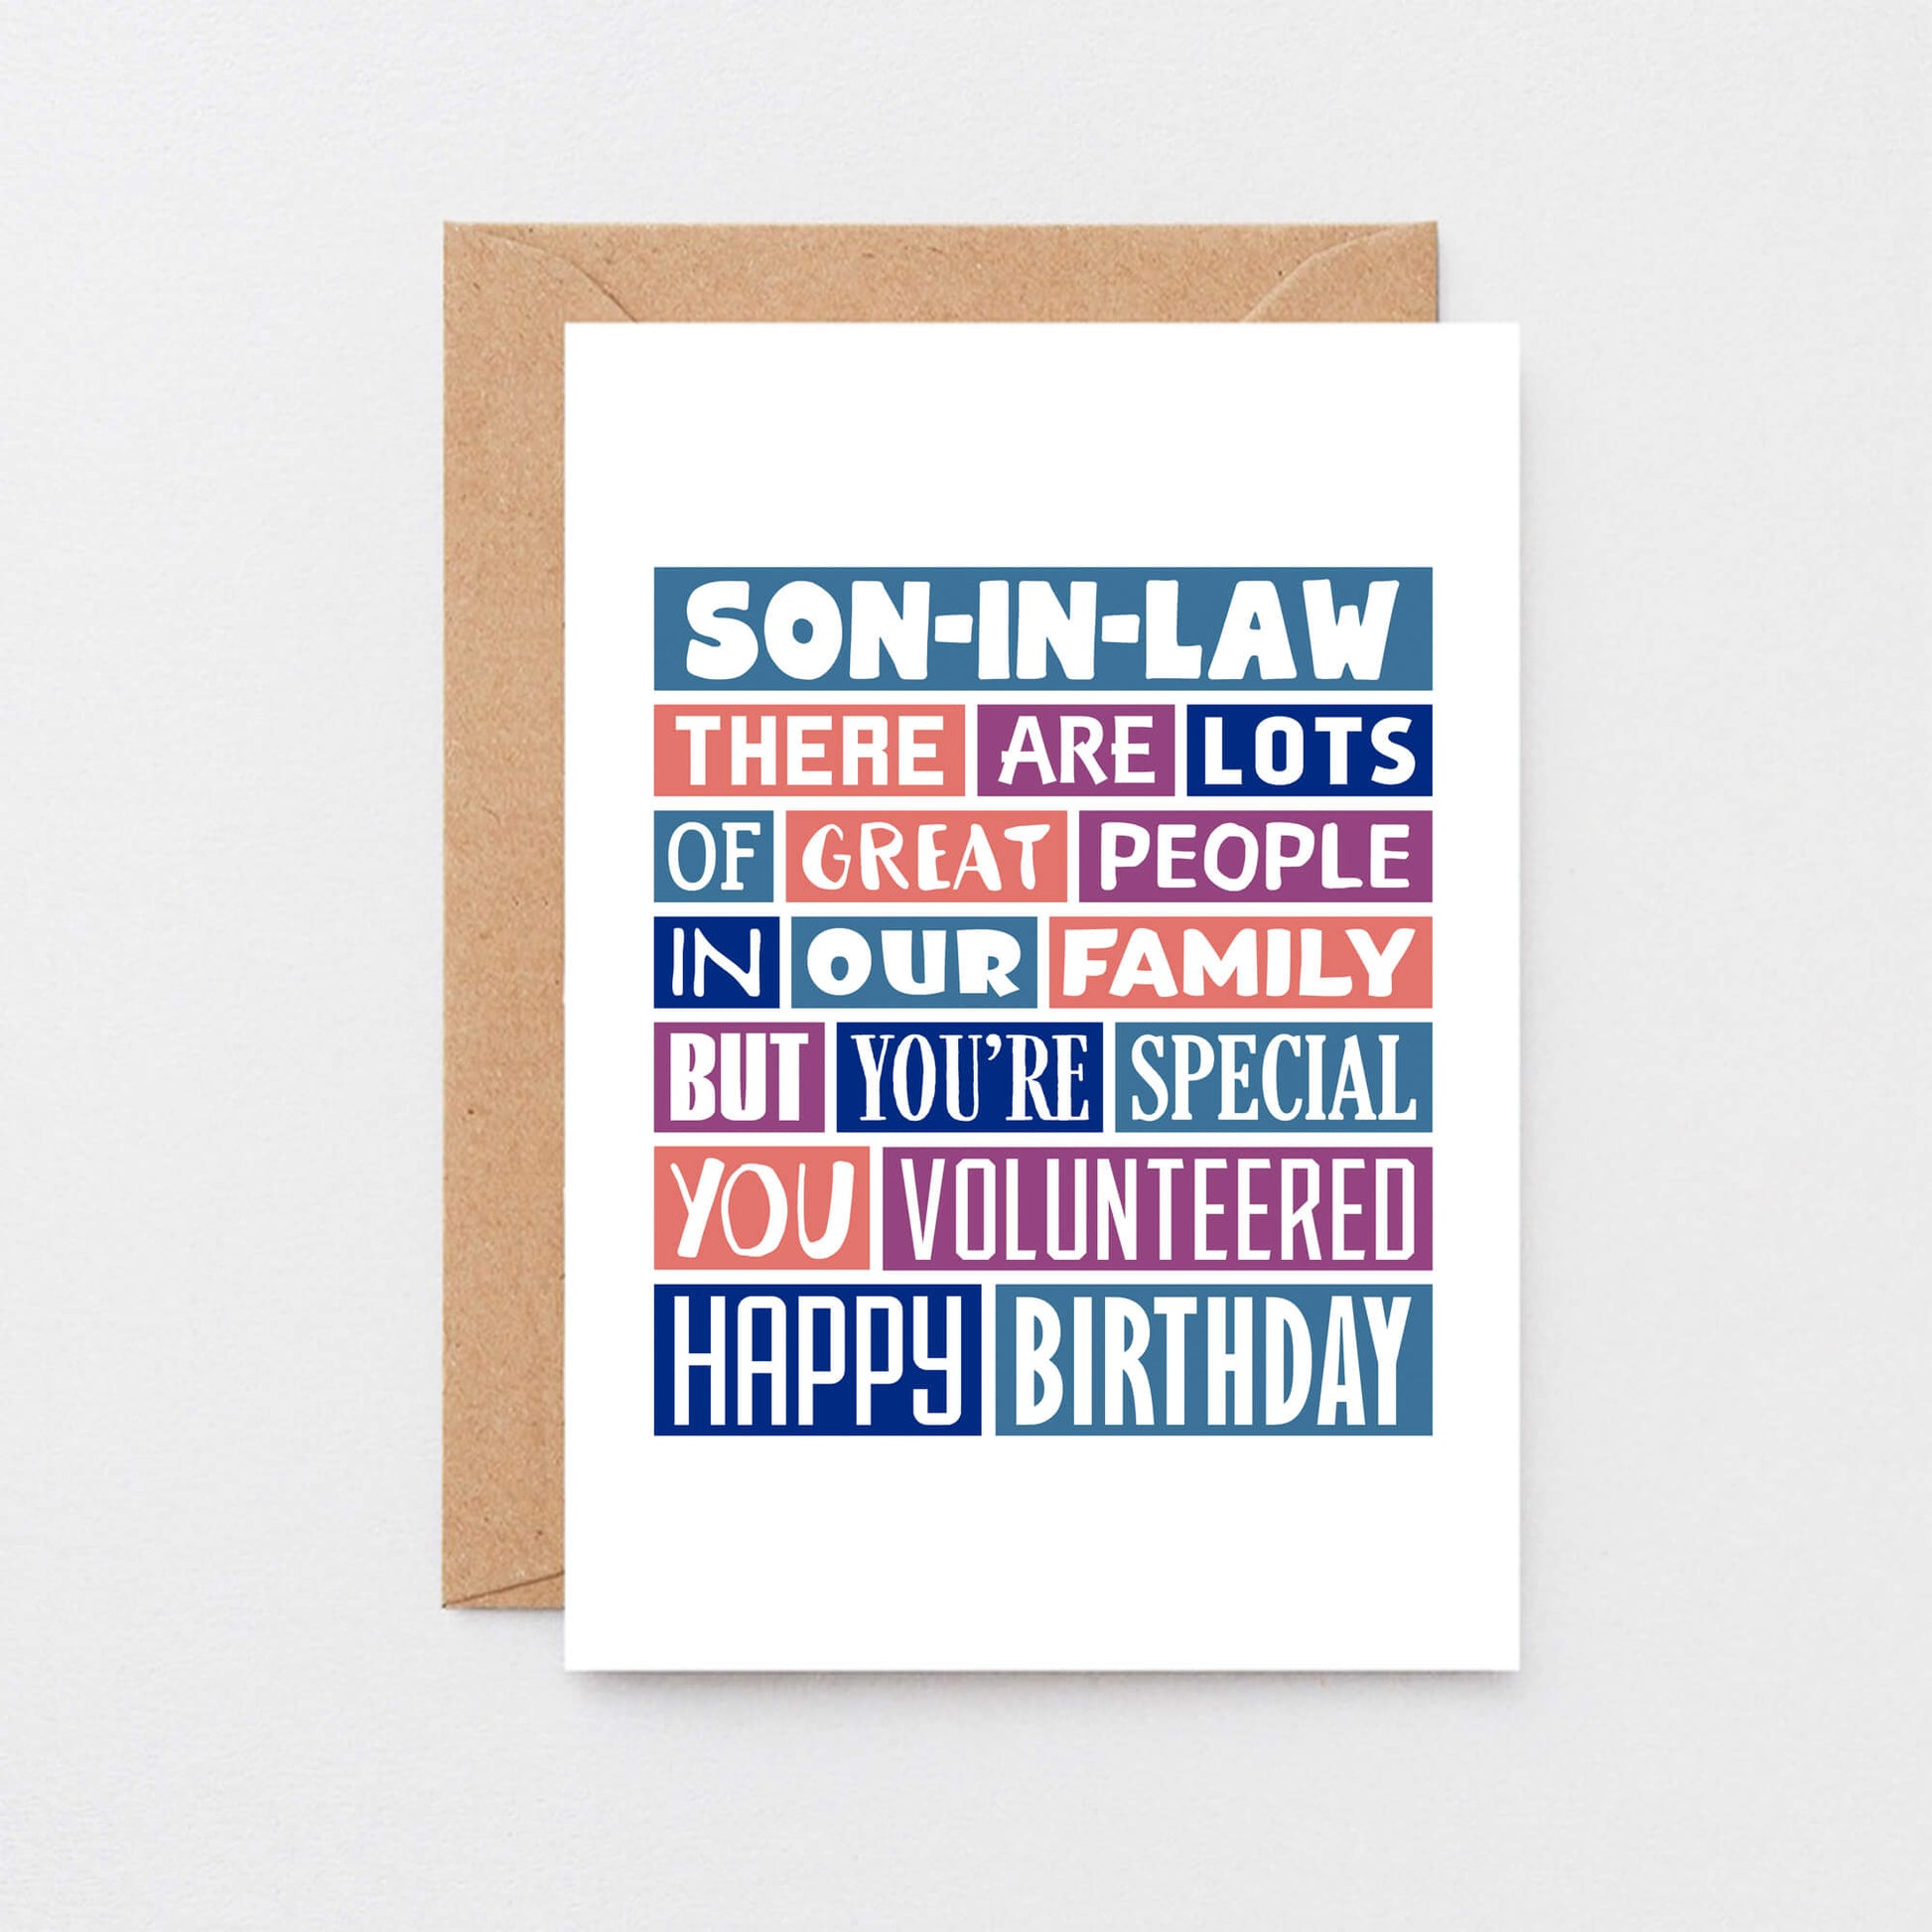 Big Son-in-Law Card by SixElevenCreations. Reads Son-in-law There are lots of great people in our family but you're special. You volunteered. Happy birthday. Product Code SE0342A5